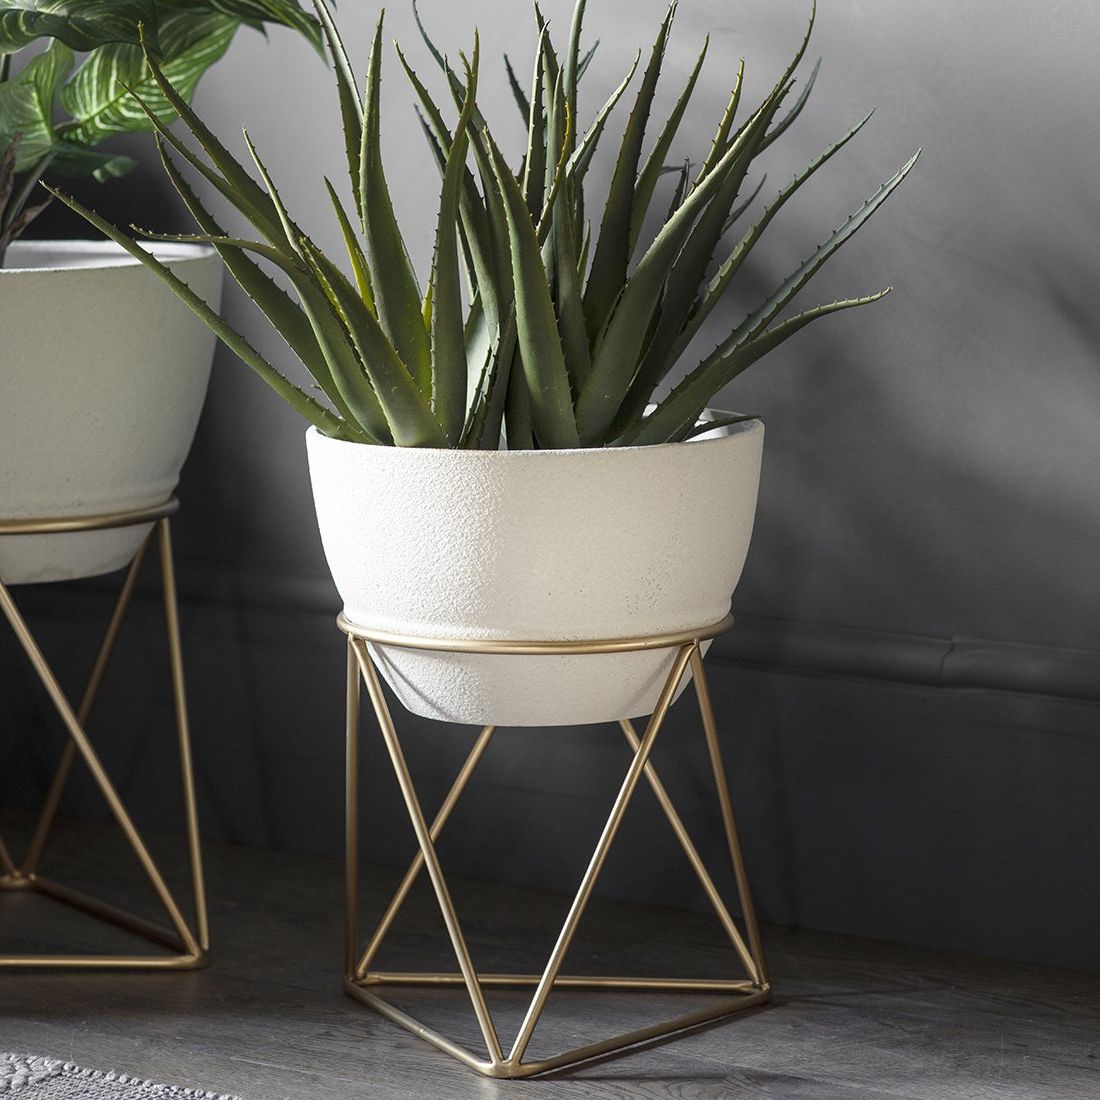 2020 Ivory Plant Stands For Set Of Two Ivory Planters With Gold Geometric Stand – Primrose & Plum (View 7 of 10)